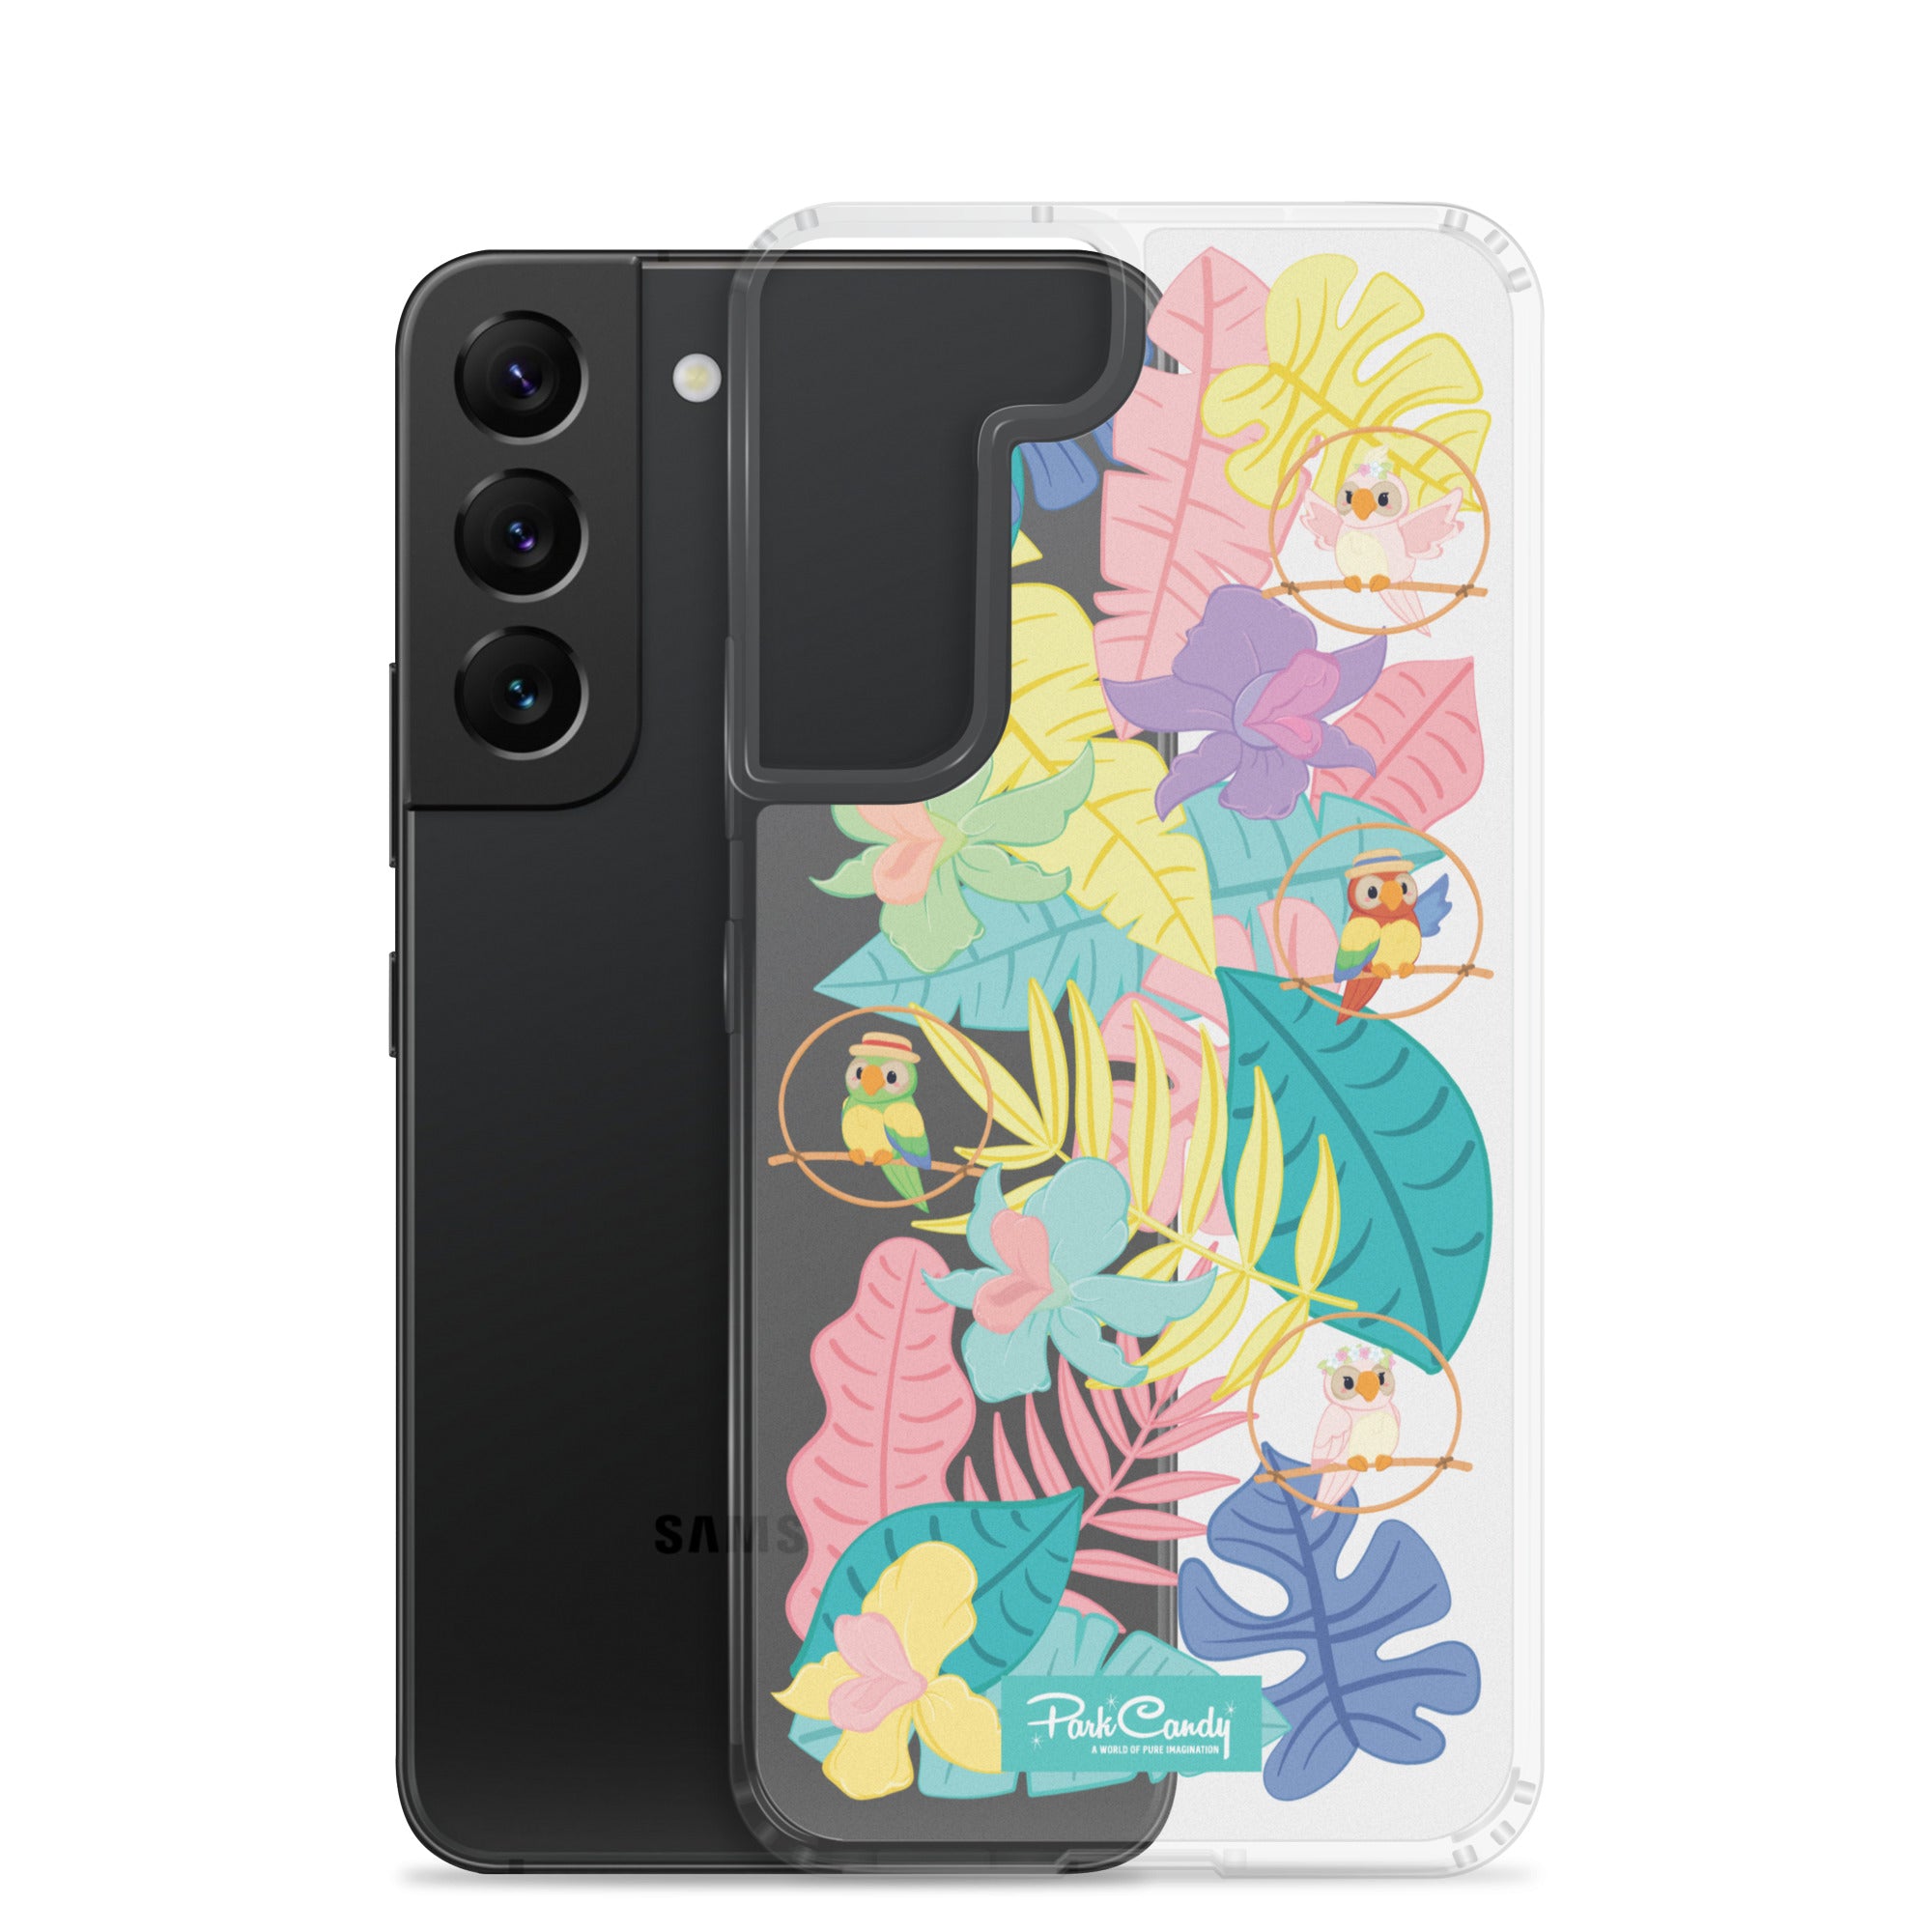 Tropical Hideaway Samsung Case - Park Candy